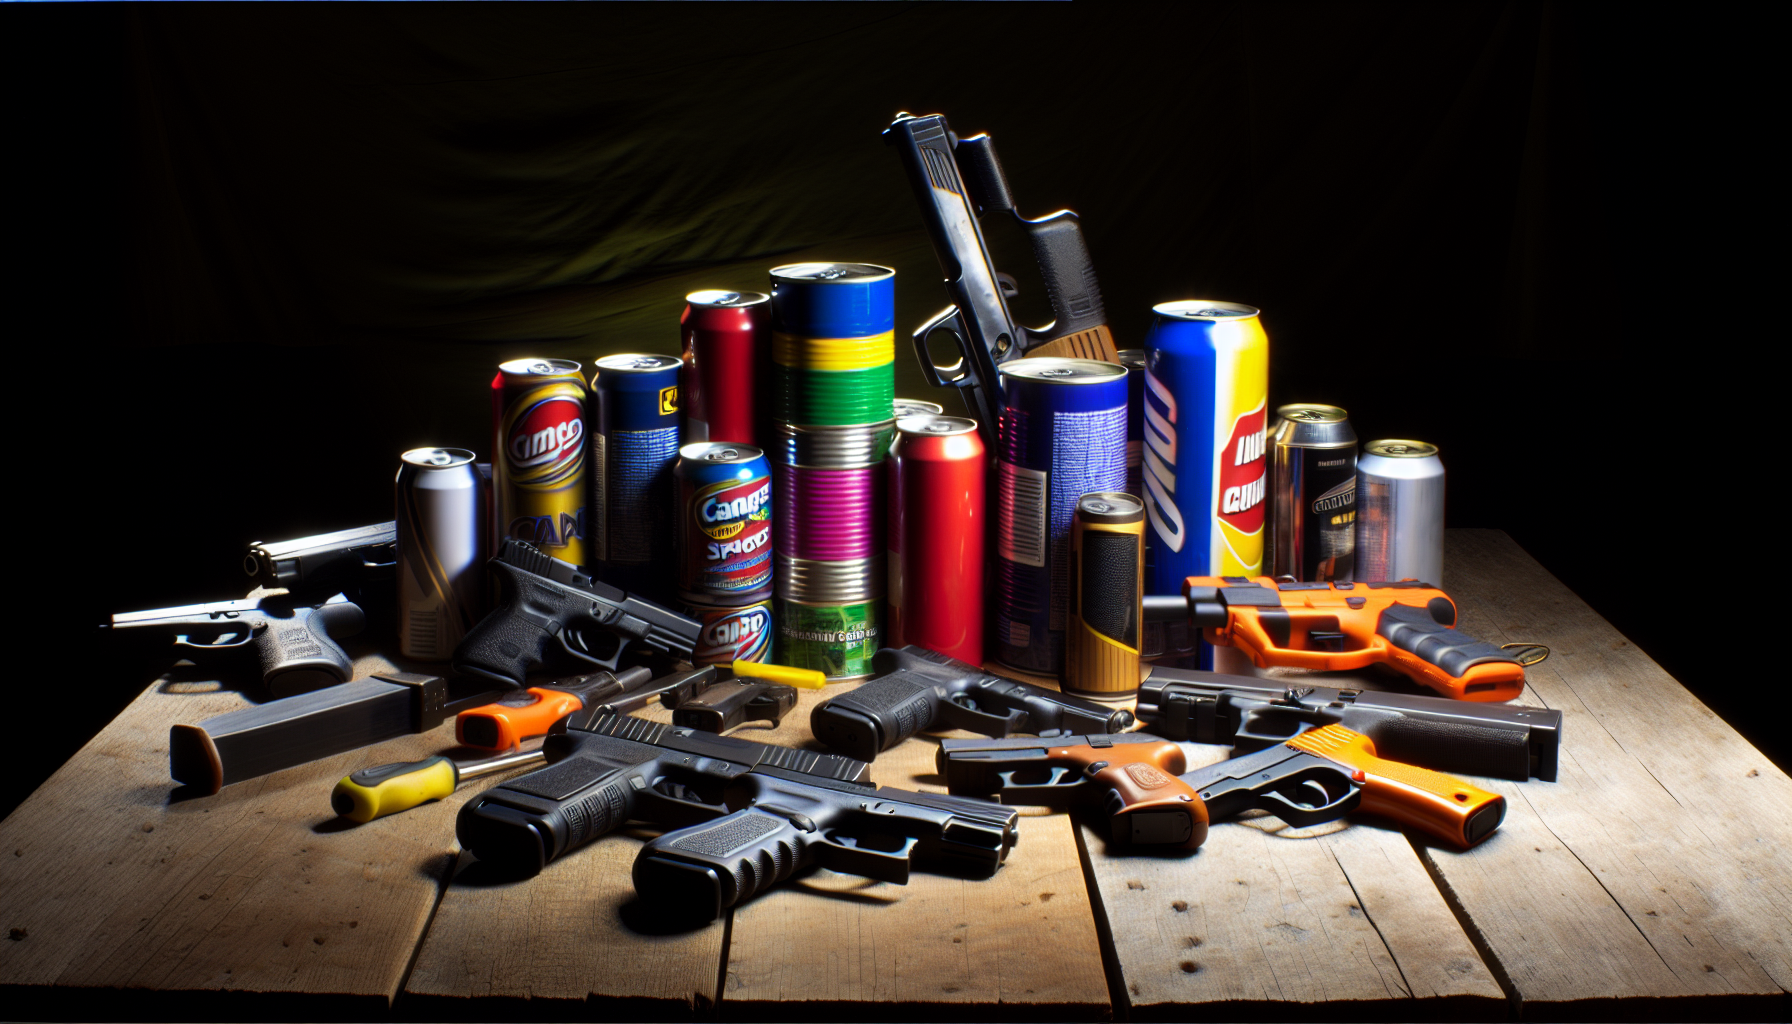 A variety of self-defense tools such as firearms, stun guns, and pepper spray, representing diverse regulations and attitudes towards self-defense tools